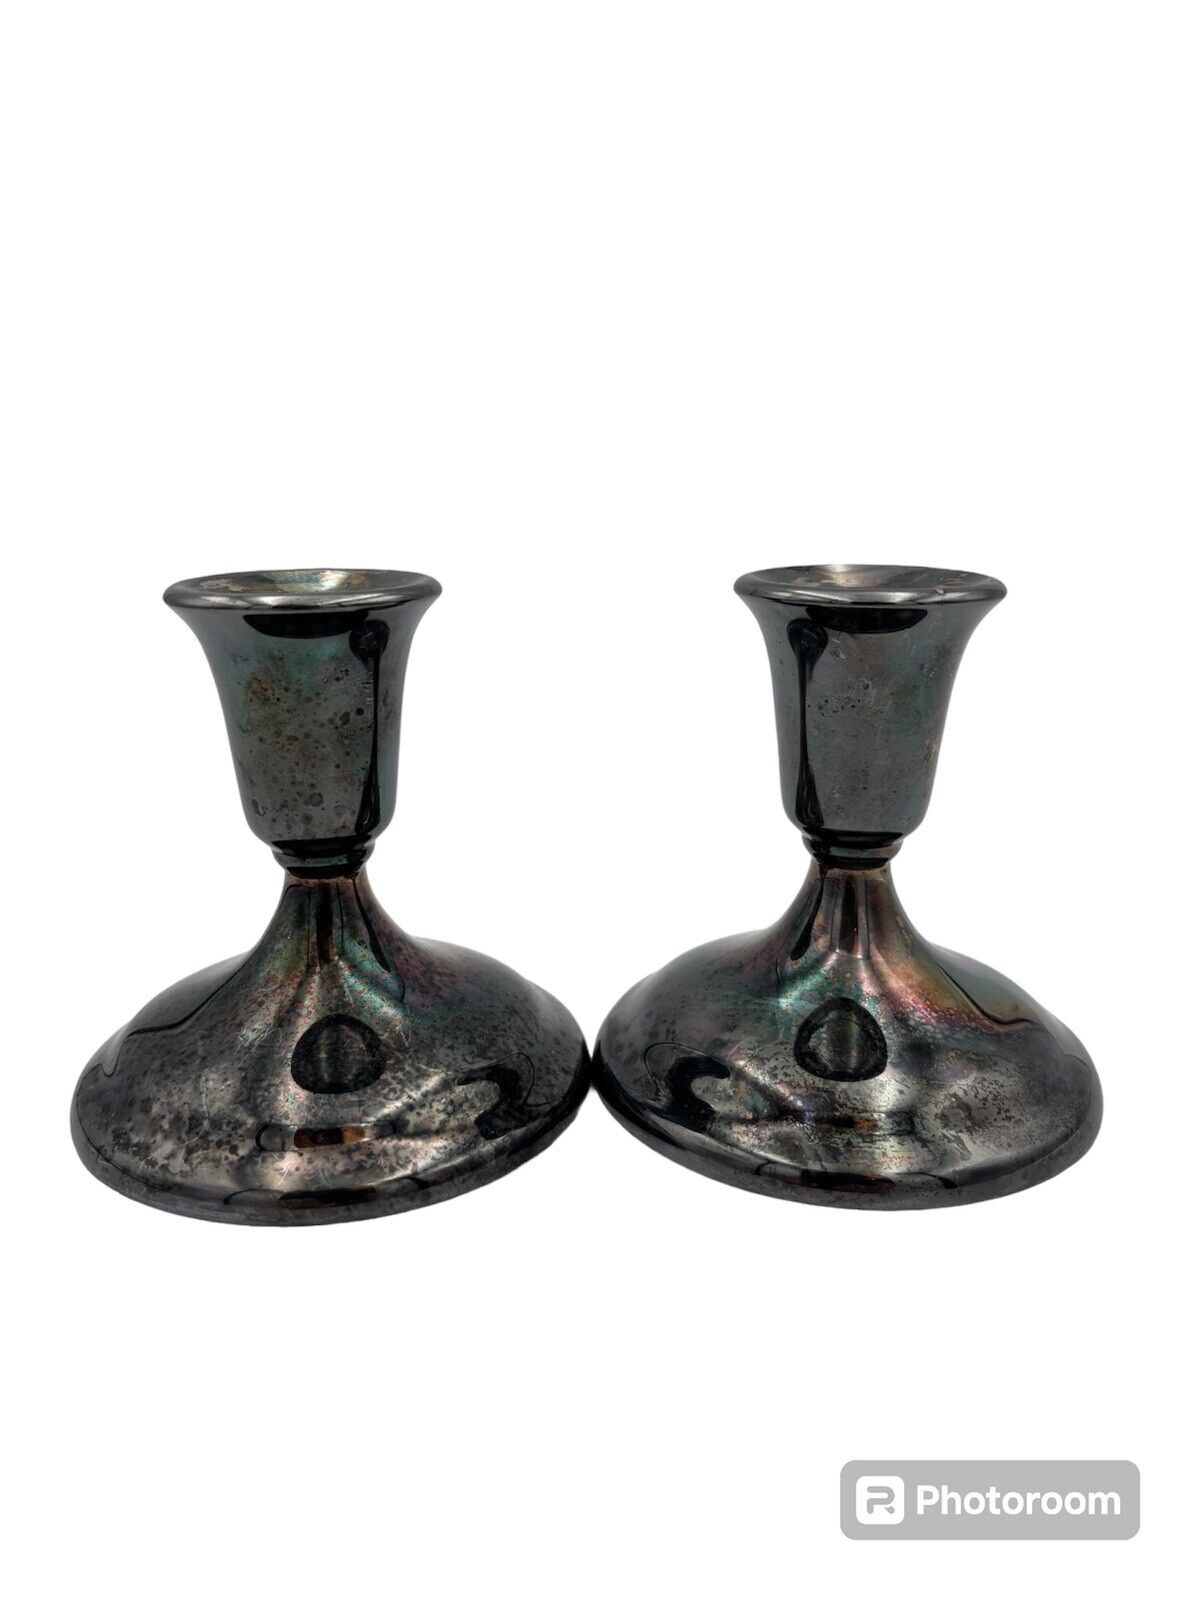 Pair of Silver Plated Candle Stick Holders (Set of 2)